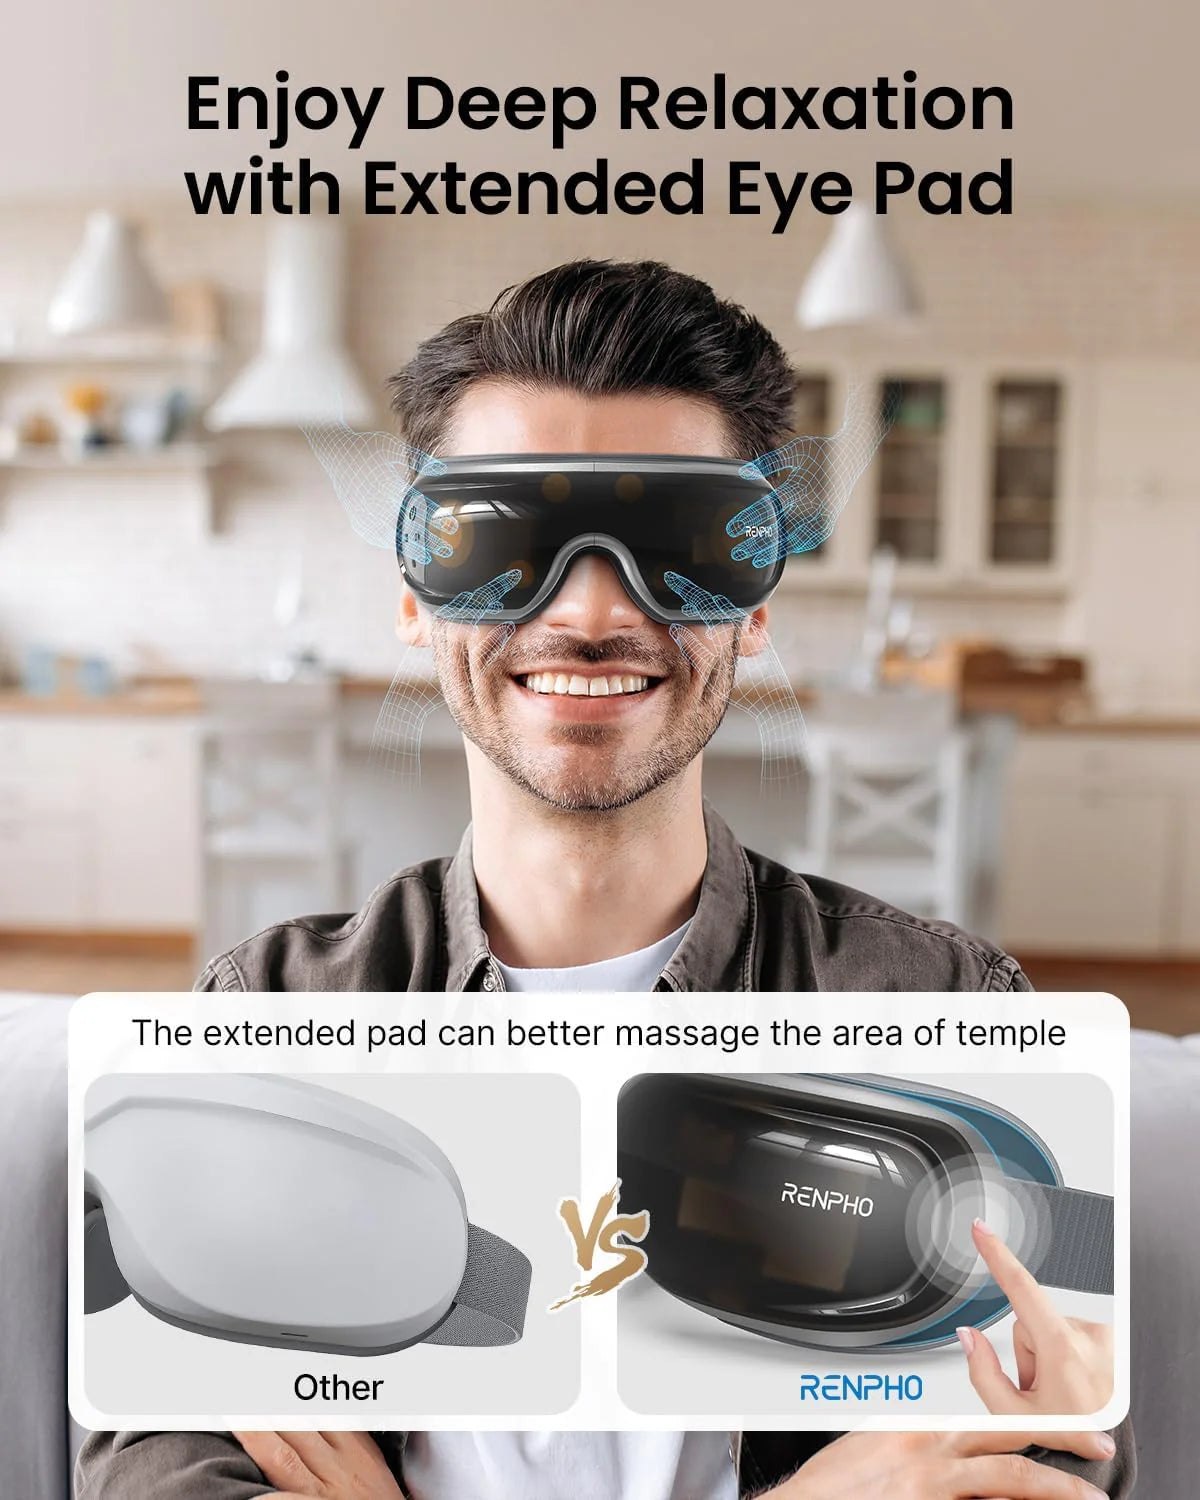 A smiling man in a casual shirt wearing the Renpho EU Eyeris 3 Eye Massager that covers his eyes and temples. Comparative images of two eye massagers below highlight features, labeled as "other" and "Renpho EU Eyeris 3.